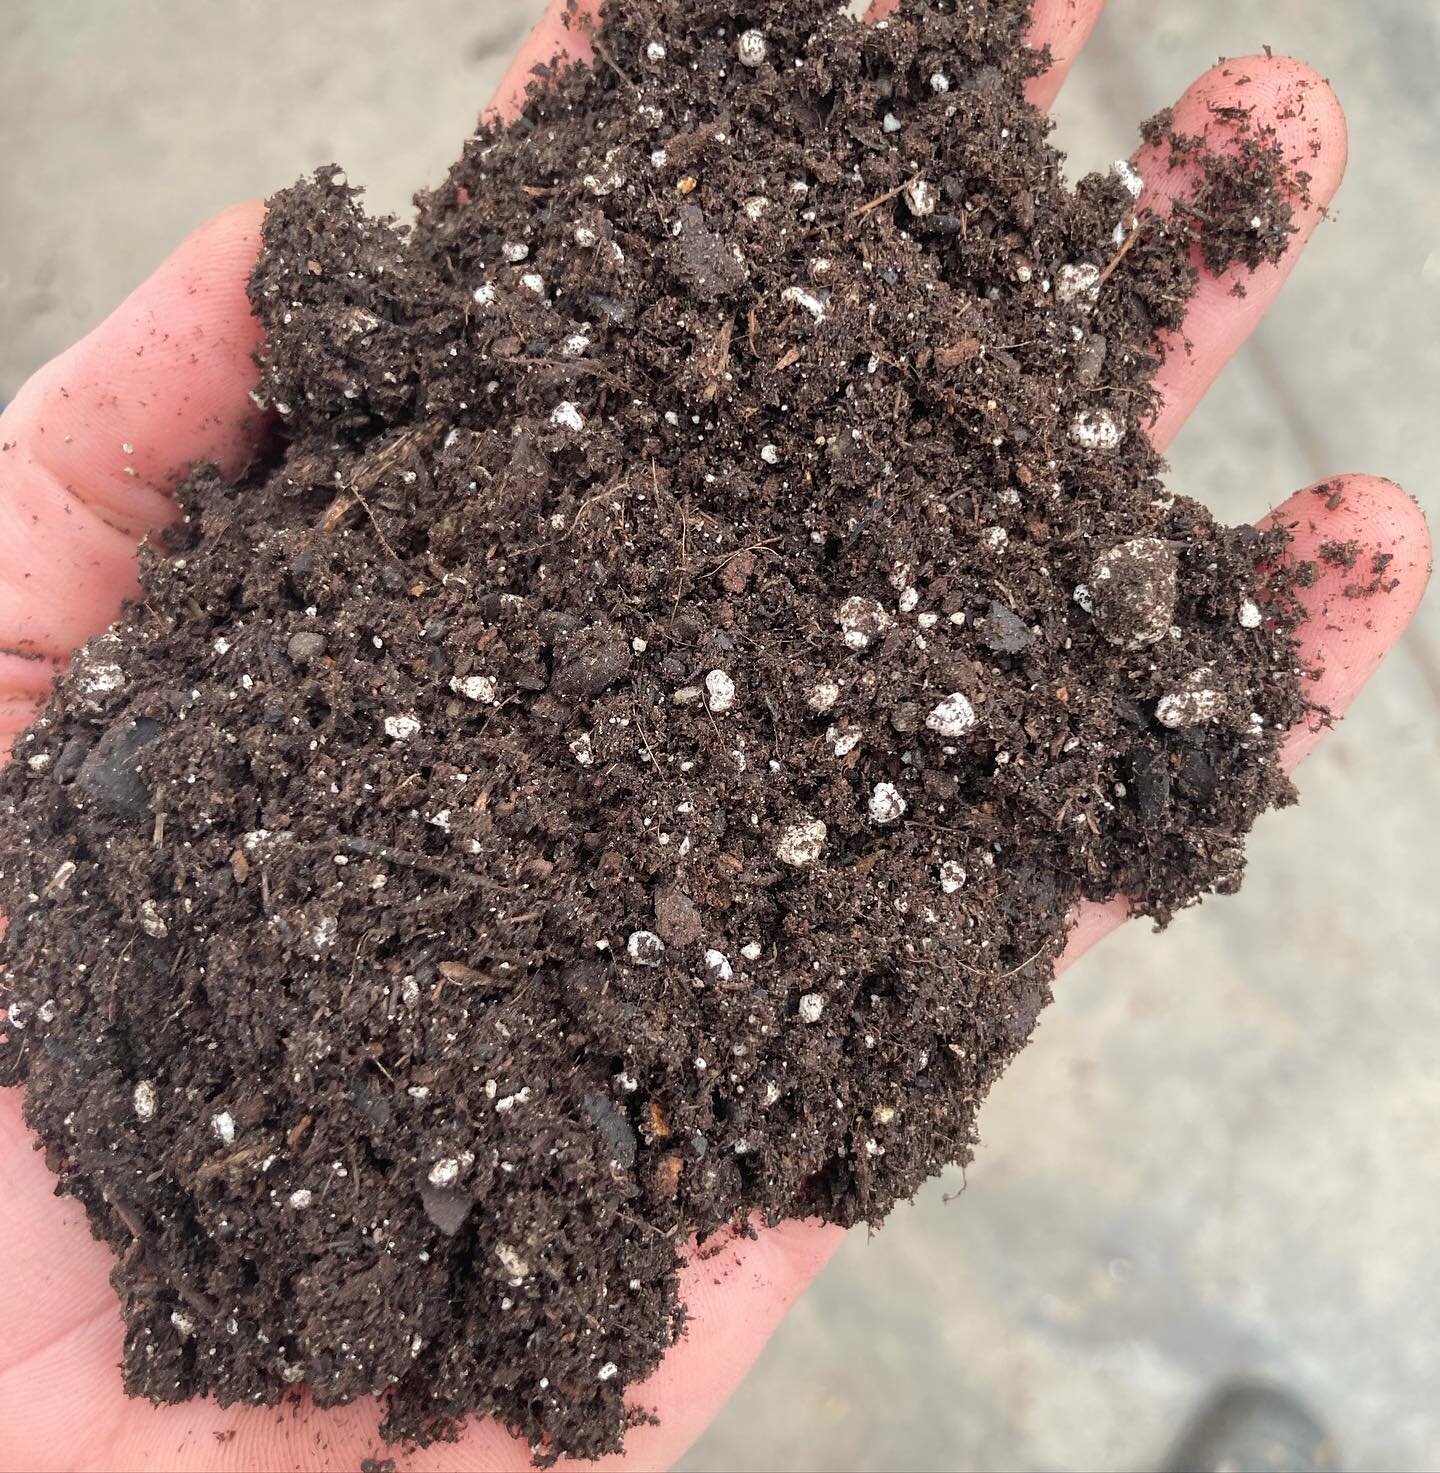 Introducing our Pro-Base Mix, a lower cost growing media for growers who wish to supplement their own fertility. Originally designed for microgreens growers, we took our most popular living soil container mix and stripped out the added fertilizers bu